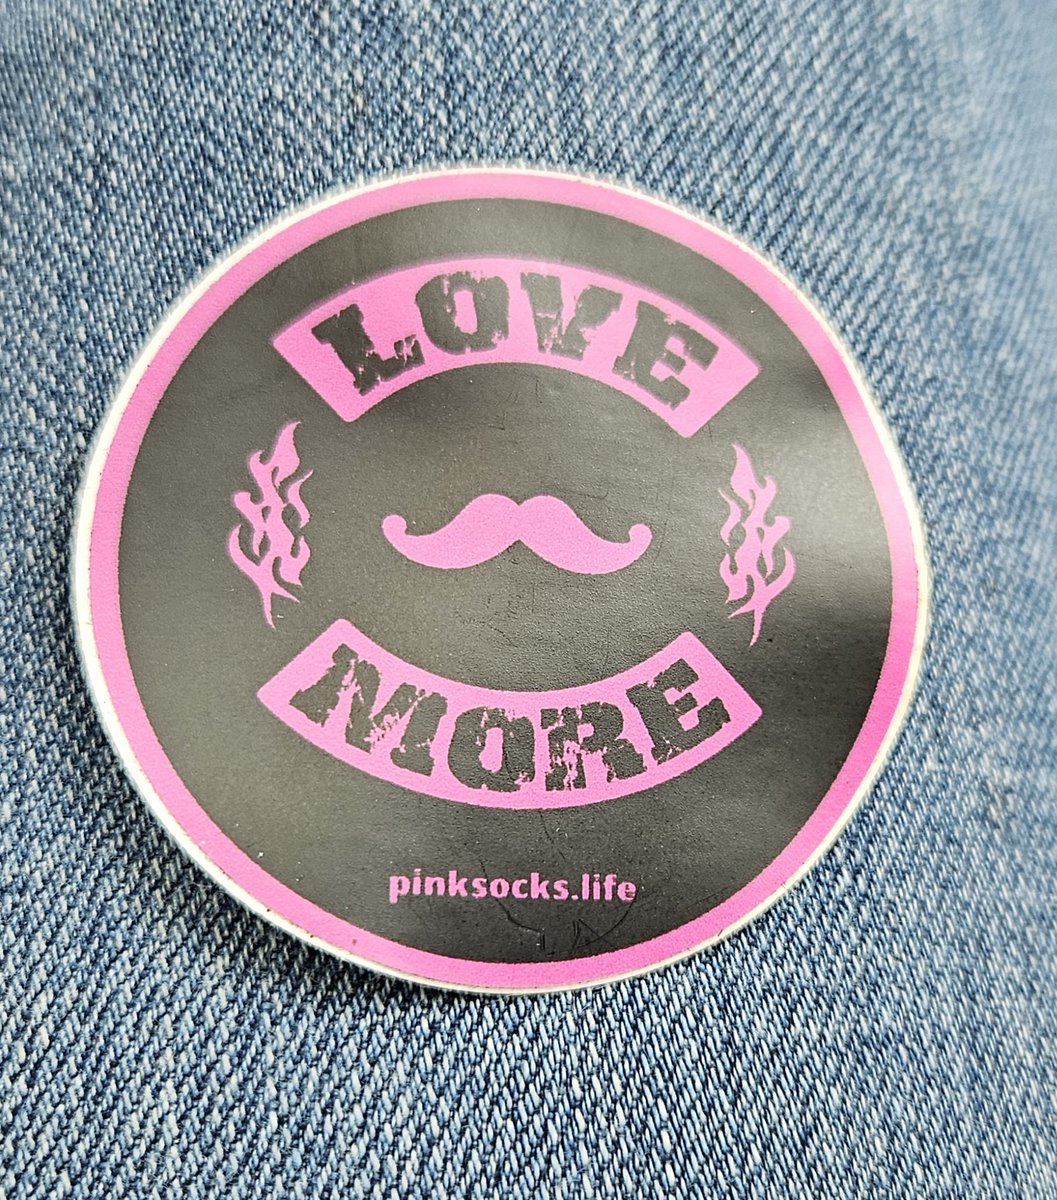 Found a dead phone in the park. Charged it, texted and called the one message I could see on the screen and ultimately turned it into the closest Verizon store. Before I did though, I slipped a sticker into the case into the case. #pinksocks #BeTheGood